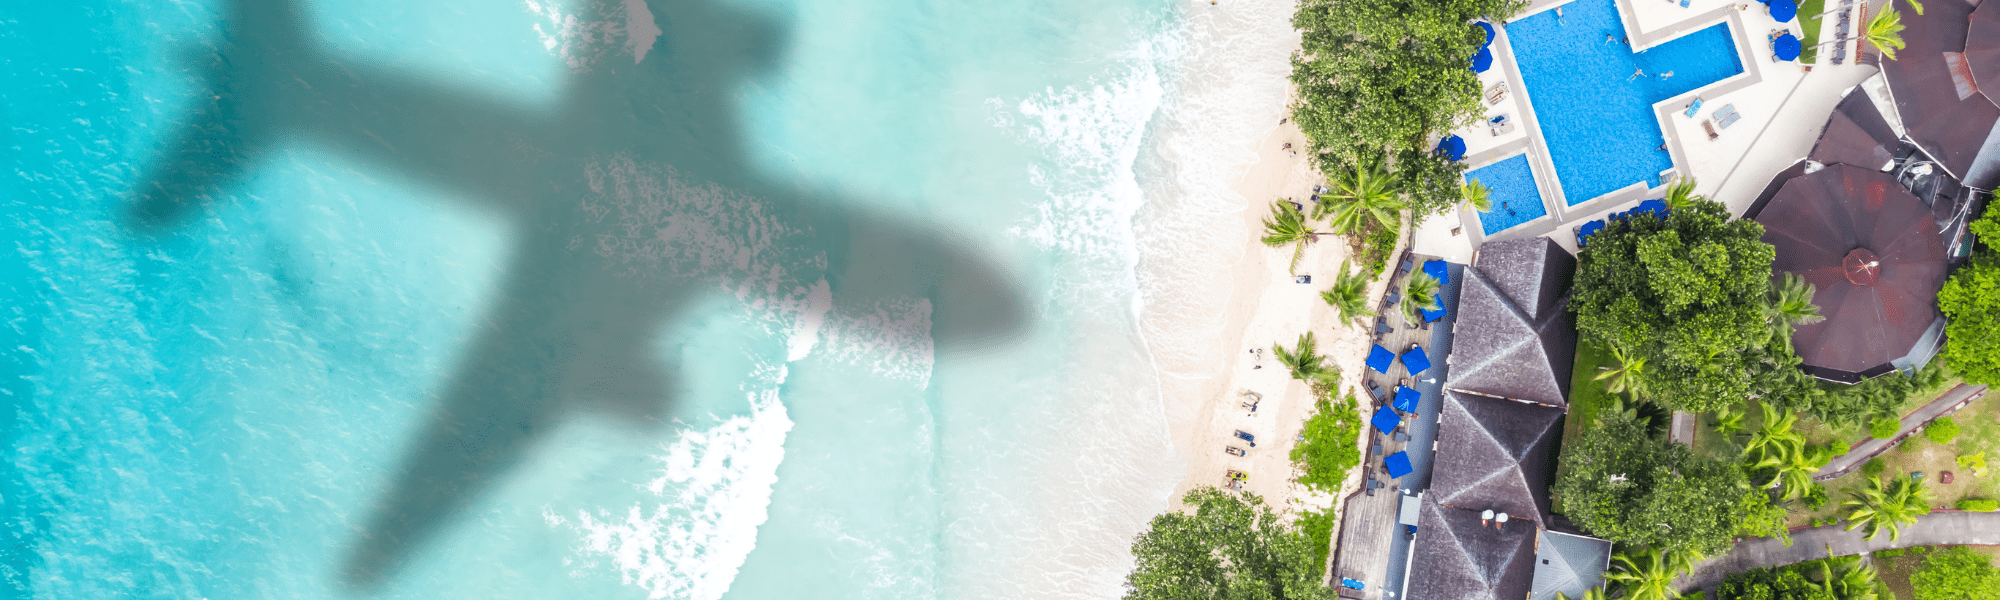 shadow of plane flying over water and beach by luxury resort